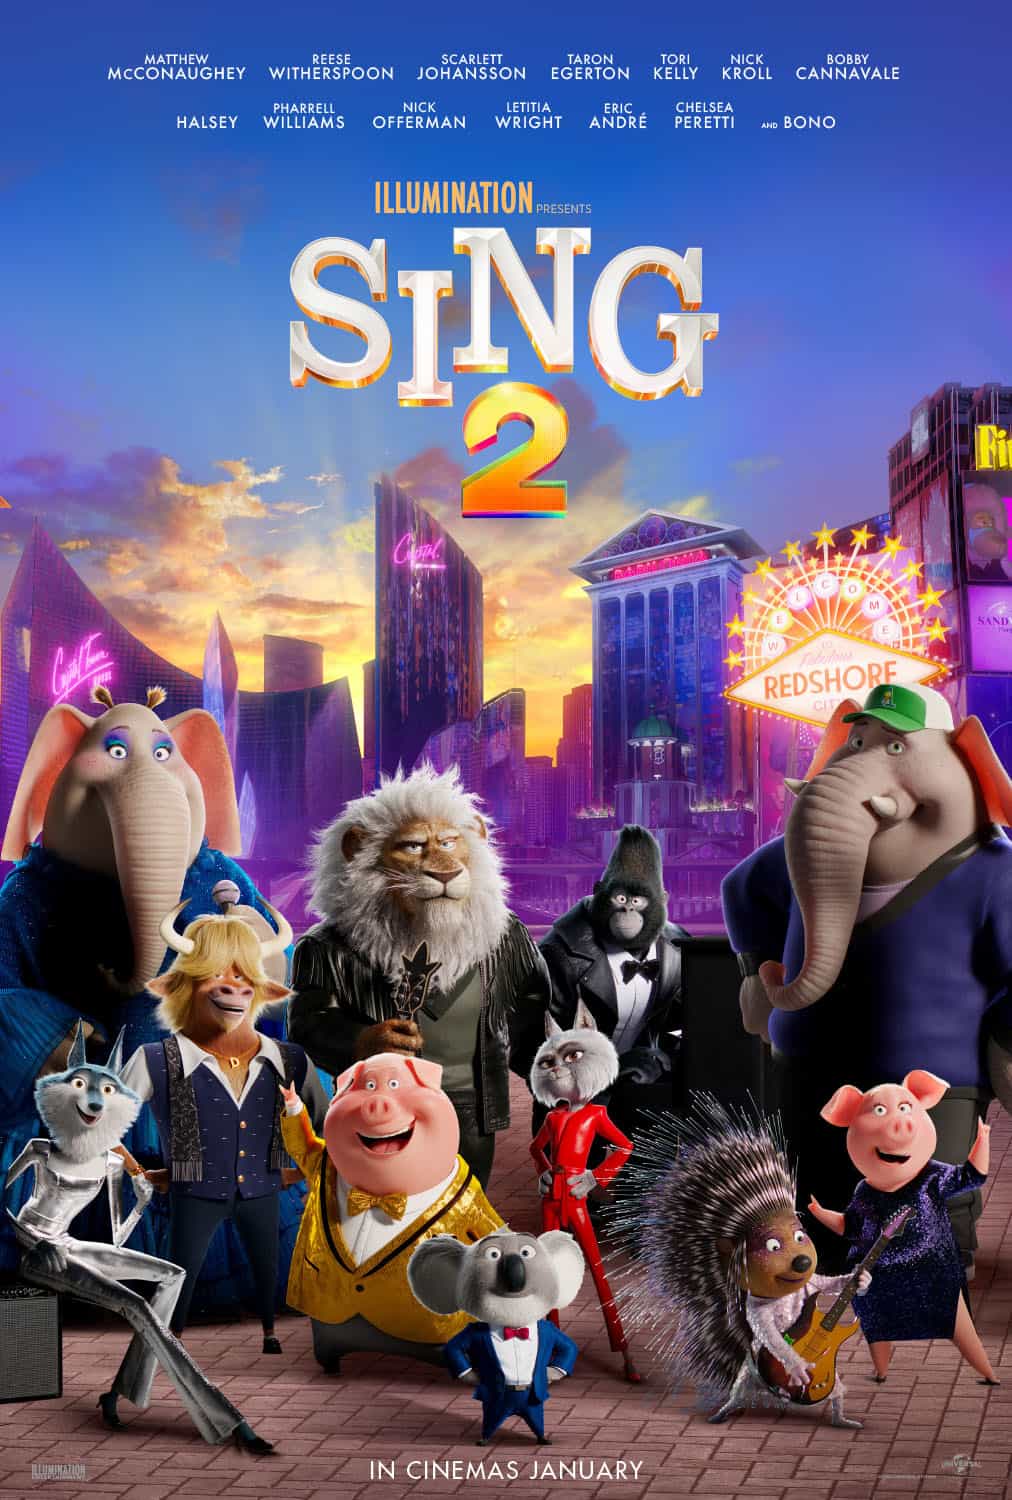 UK Box Office Figures 28th - 30th January 2022:  Sing 2 ends Spider-Man 6 week run at the top of the UK box office